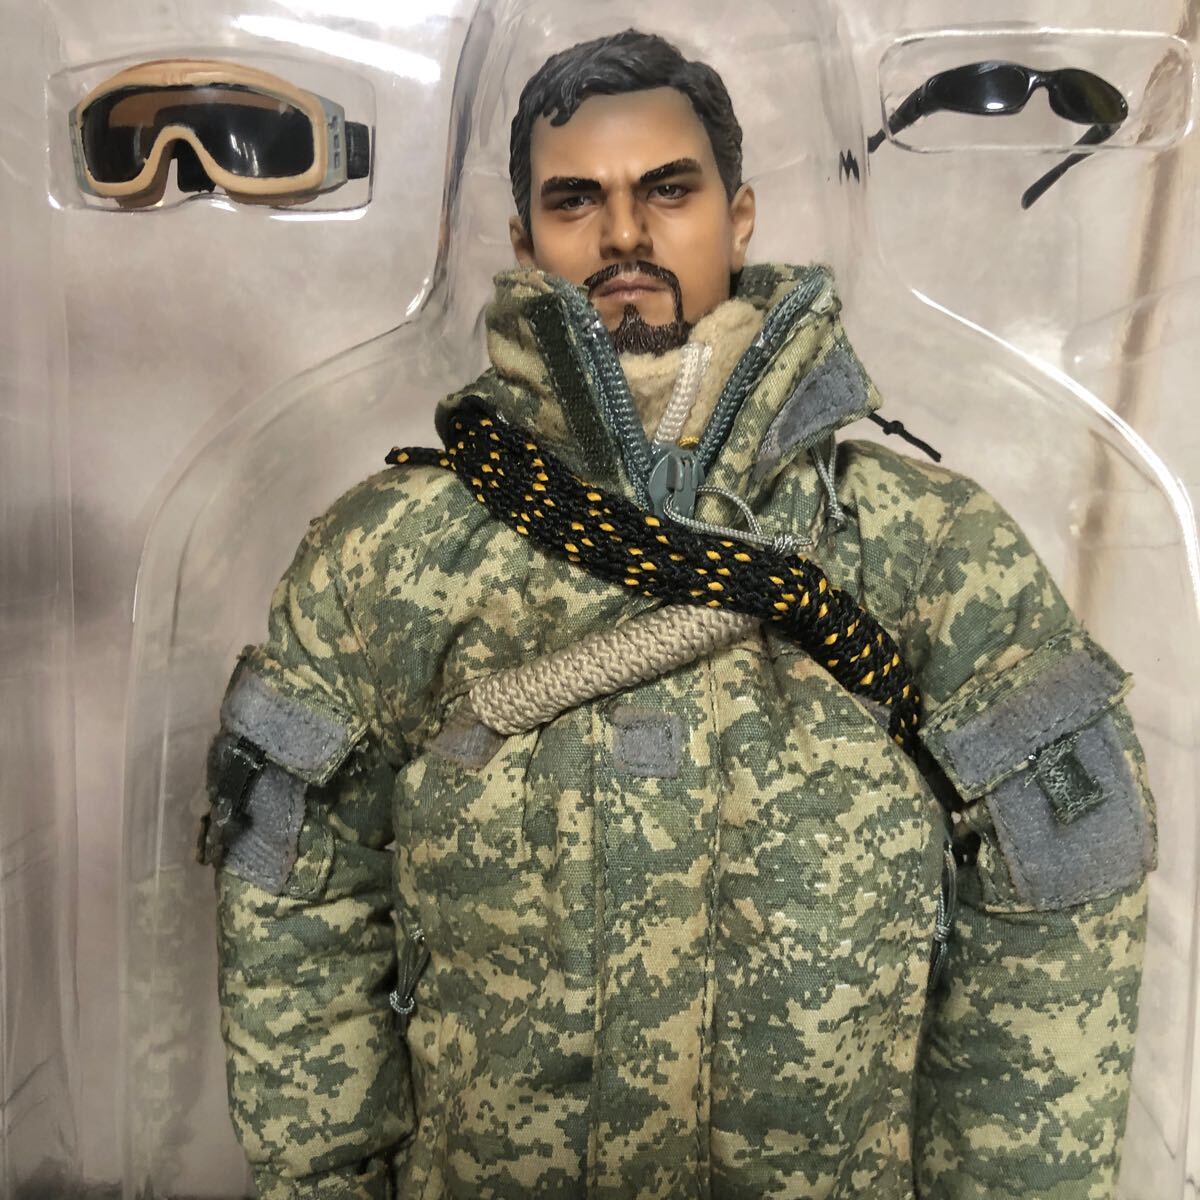 770 Hot toys ( hot toys ) 1/6 action figure MOUNTAIN OPS SNIPER ACU VERSIONsnaipa- military FULLY mountains model final product 